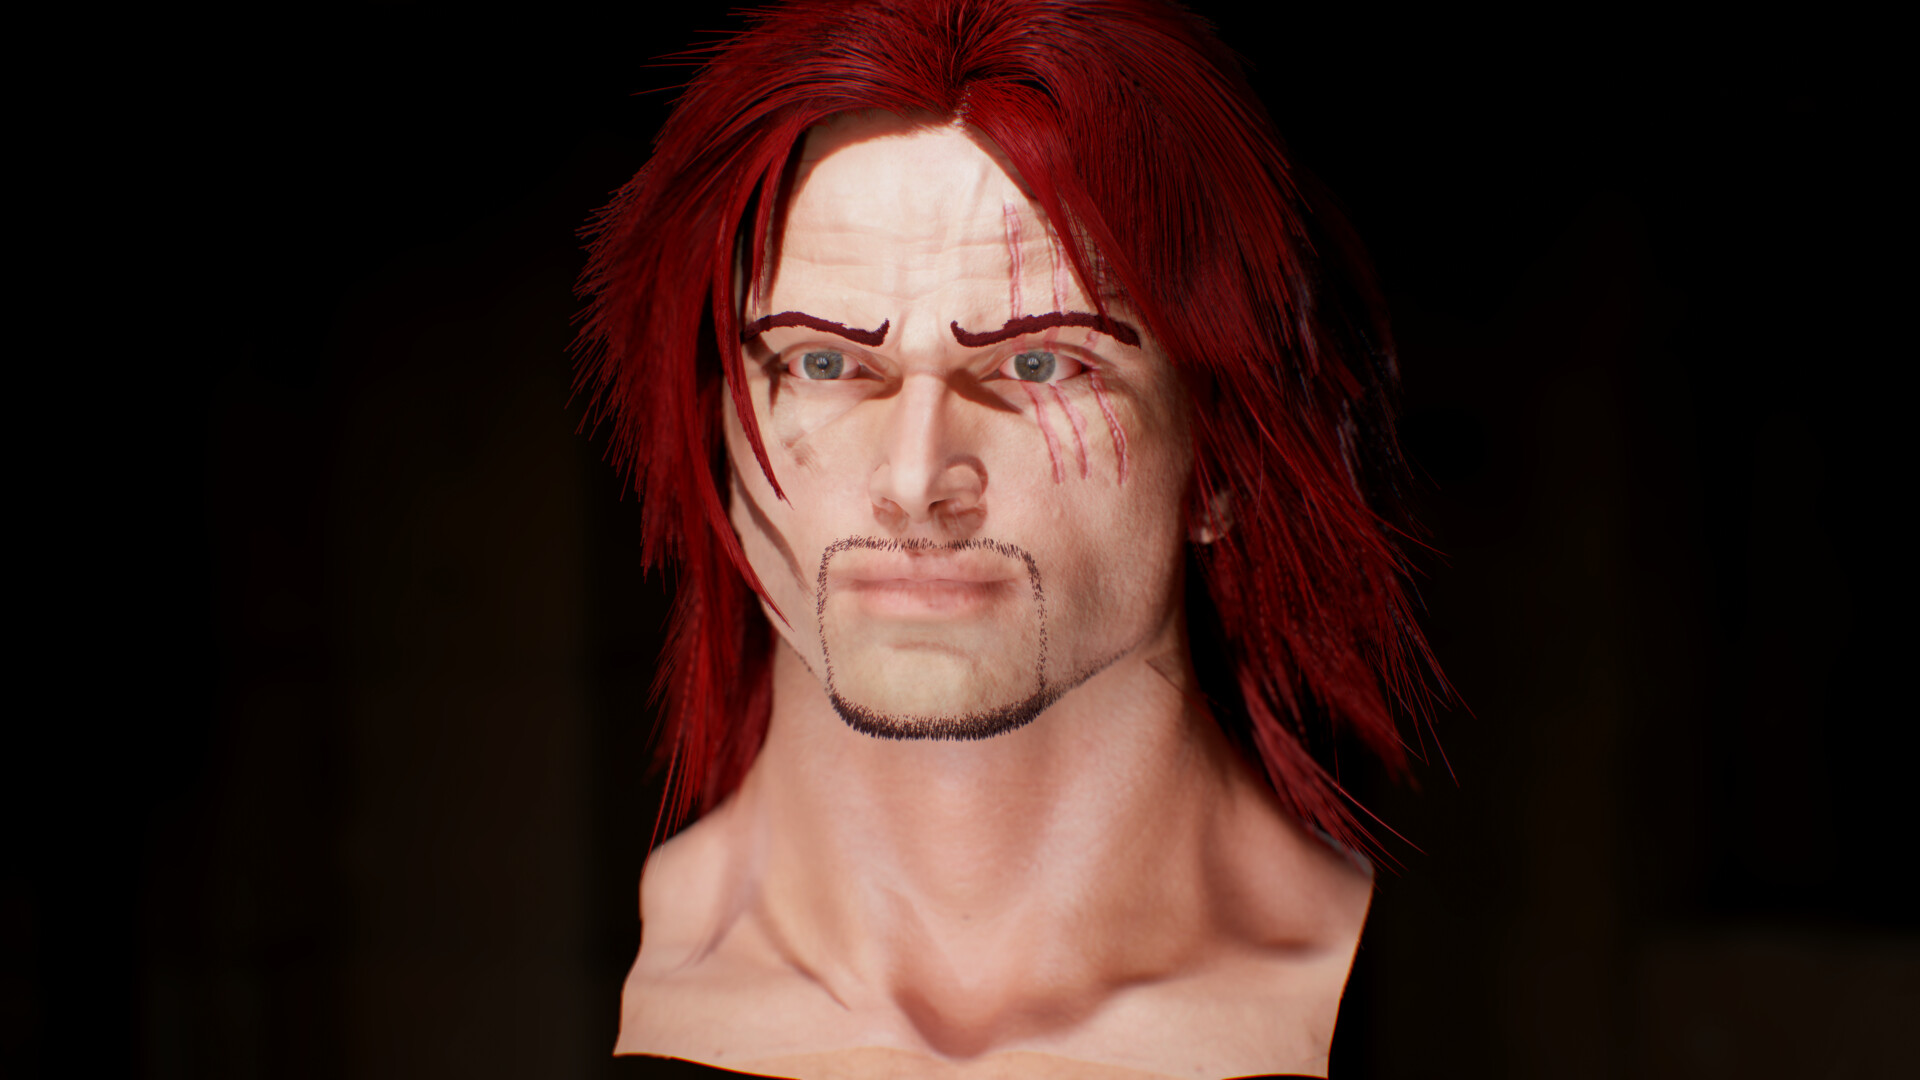 Shanks (One Piece), A Red Hair Pirate, AM Aljaber